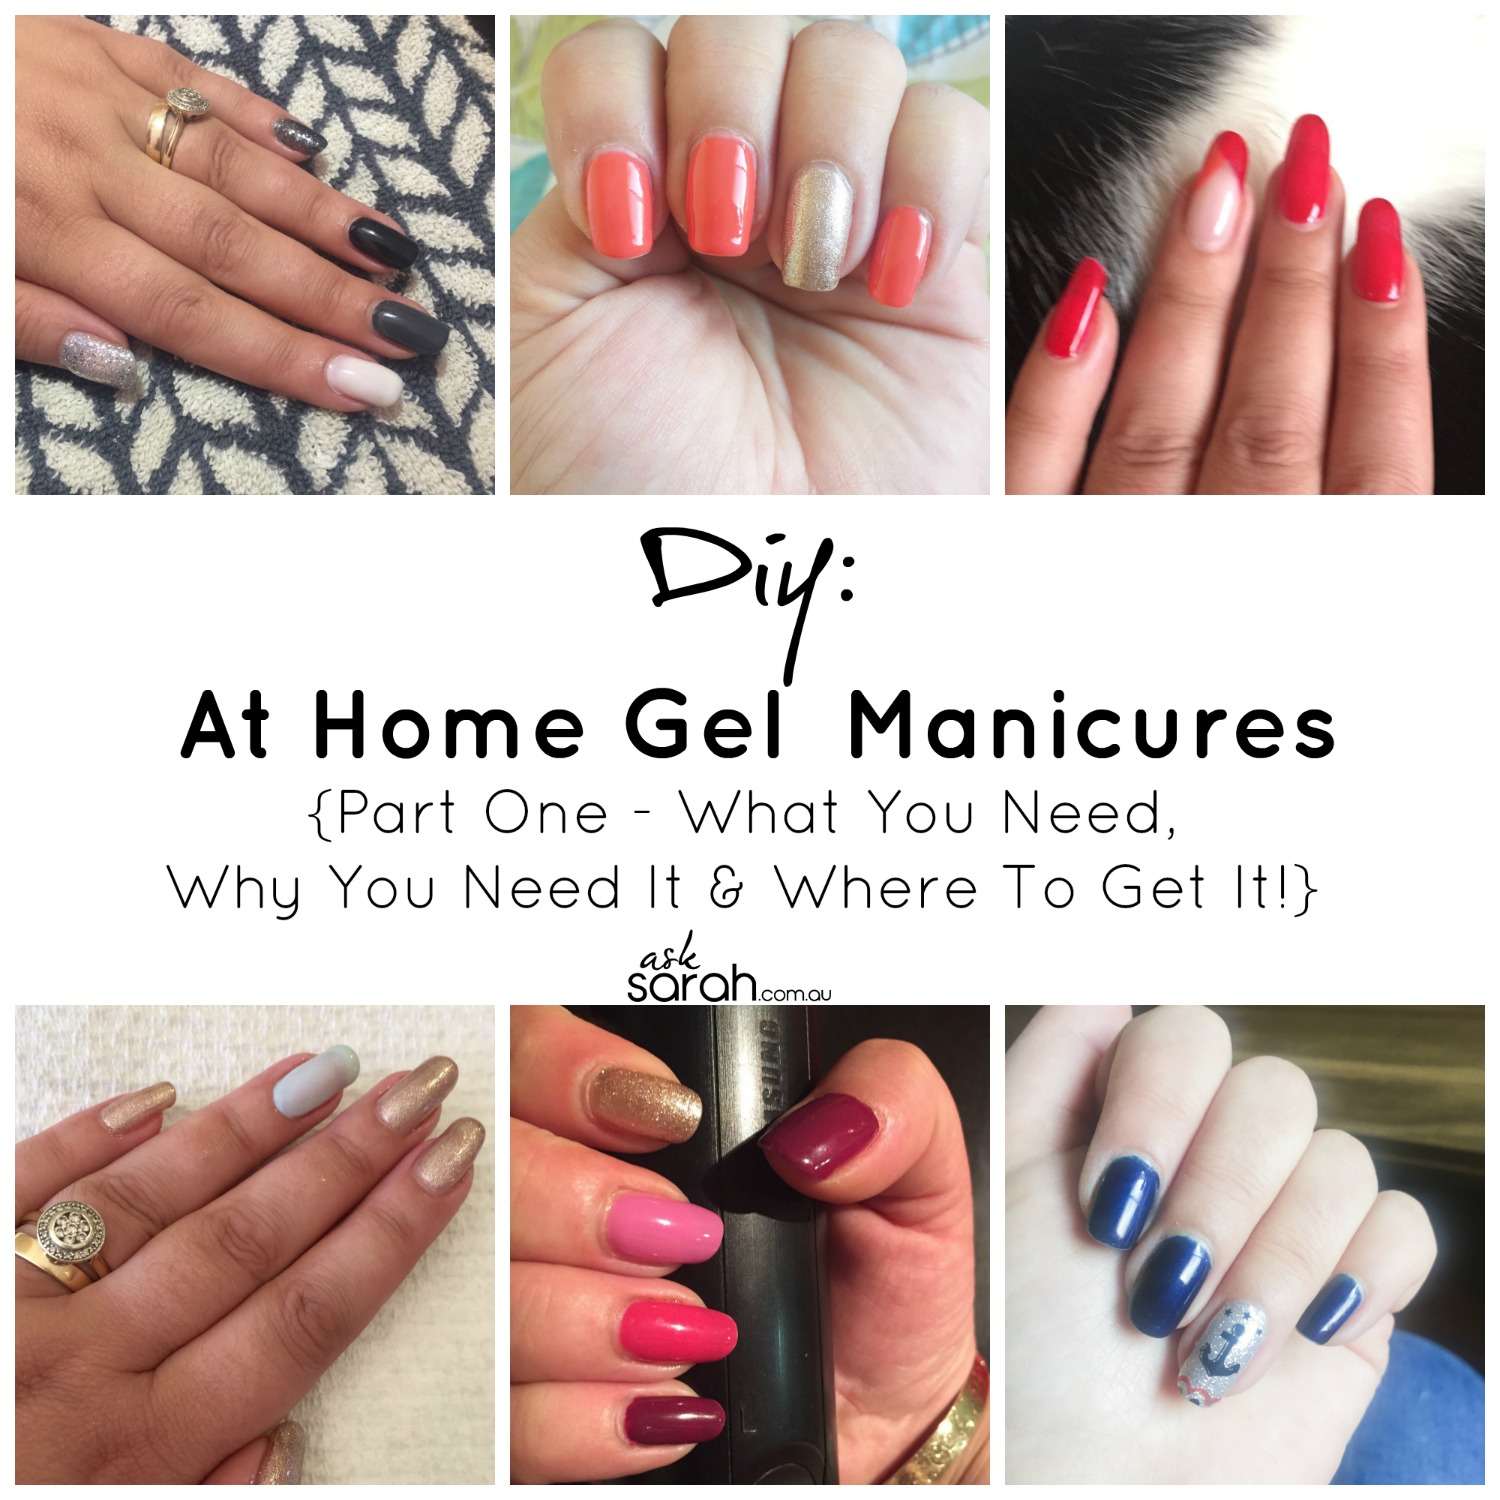 DIY: At Home Gel Manicures {Part One - What You Need, Why You Need It & Where To Get It!}